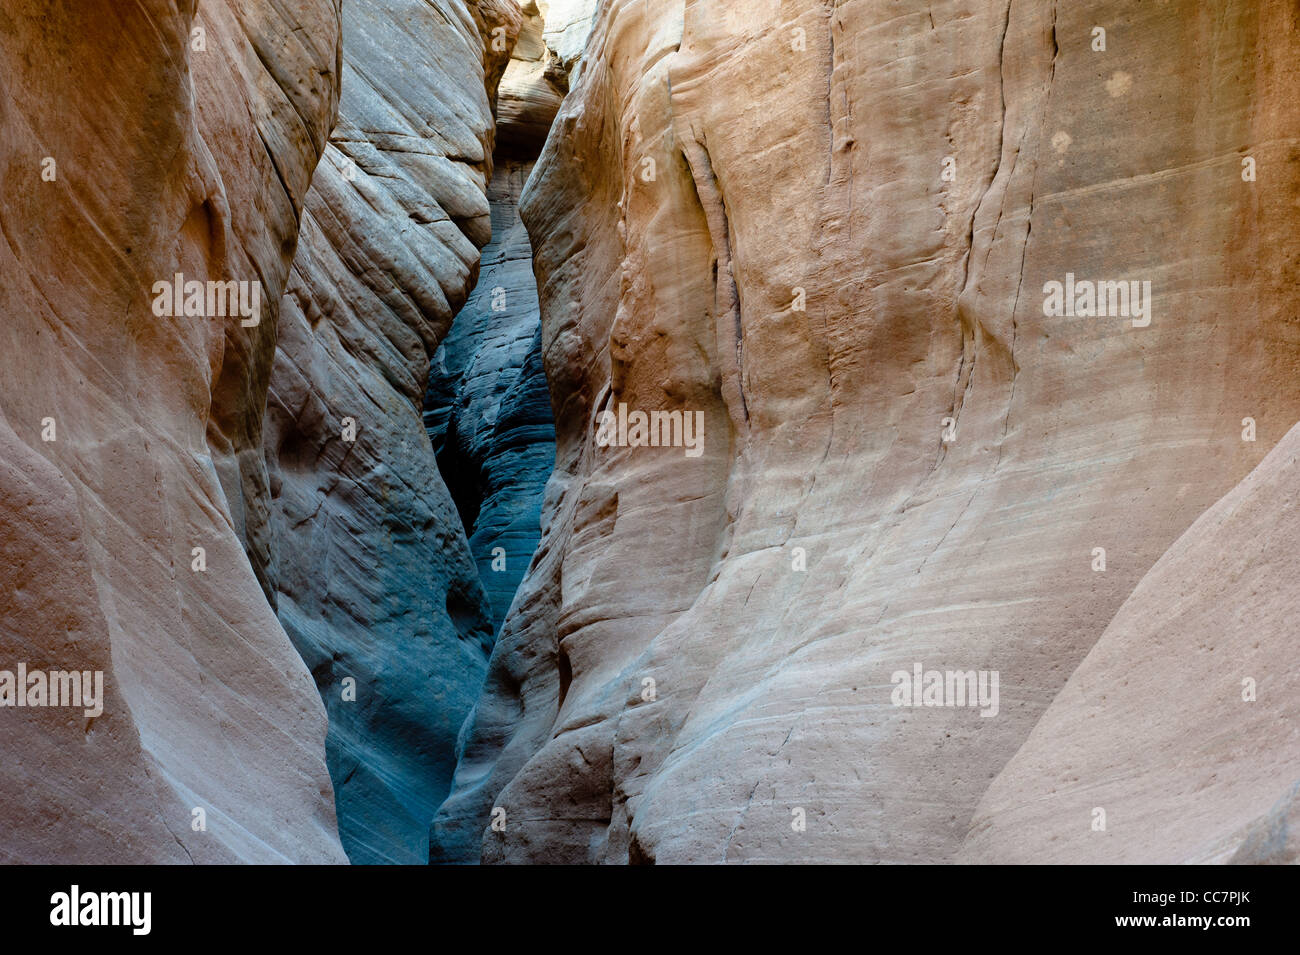 Bull valley gorge slot canyon, Grand Staircase National Monument (GSNM), Utah, USA Stock Photo